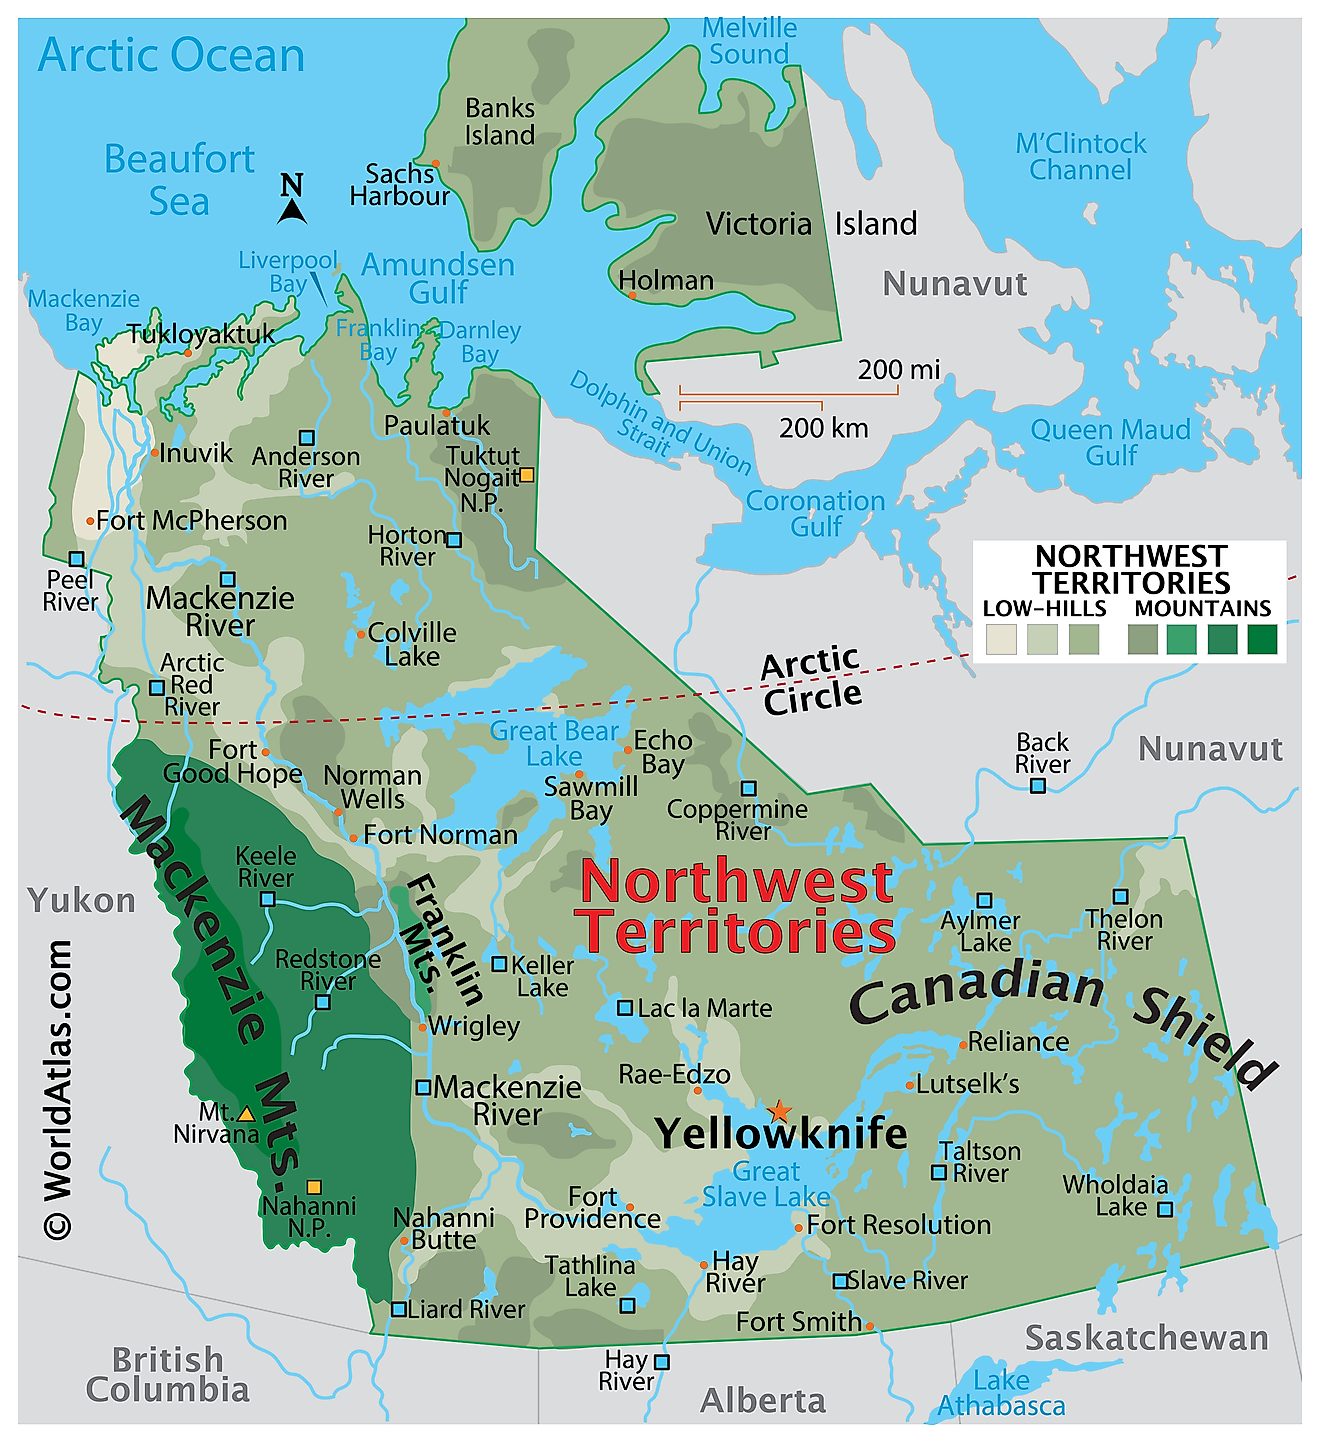 Physical Map of Northwest Territories. It shows the physical features of the Northwest Territories, including mountain ranges, important rivers, and major lakes.  